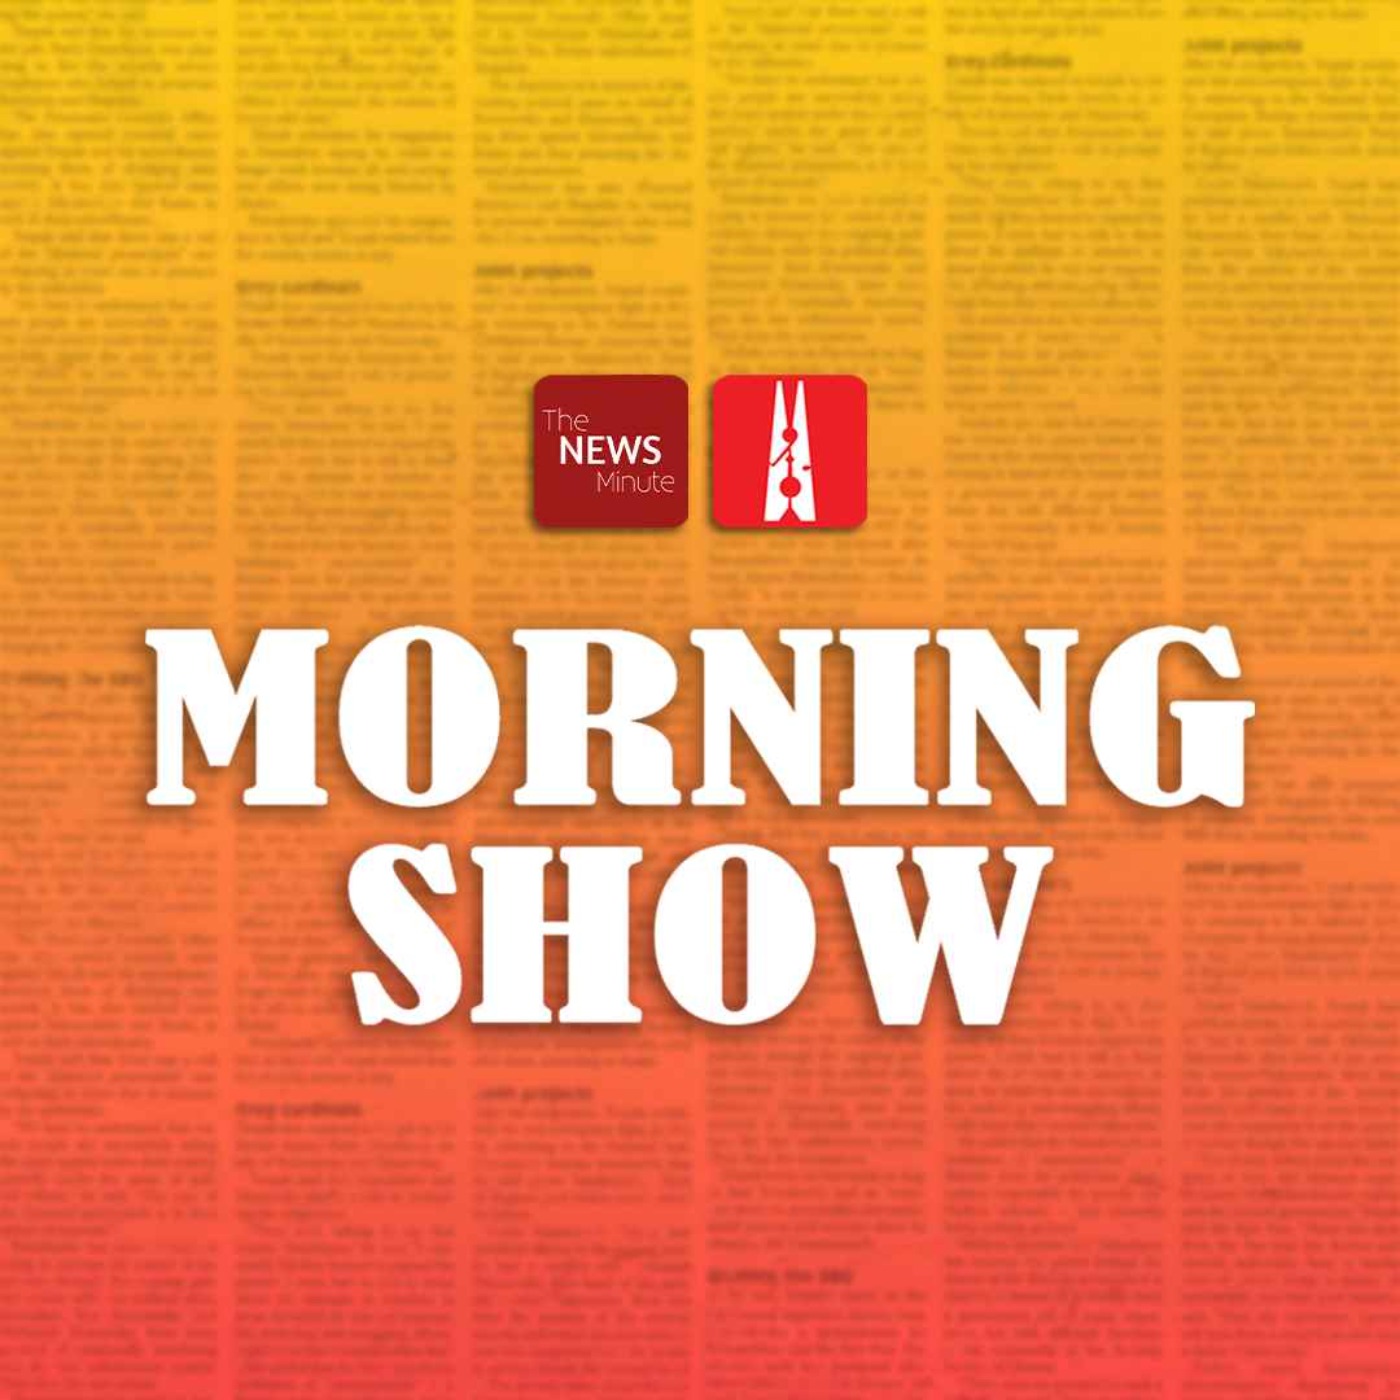 Morning Show: What Chhattisgarh’s young voters think of education, welfare state, manifestos